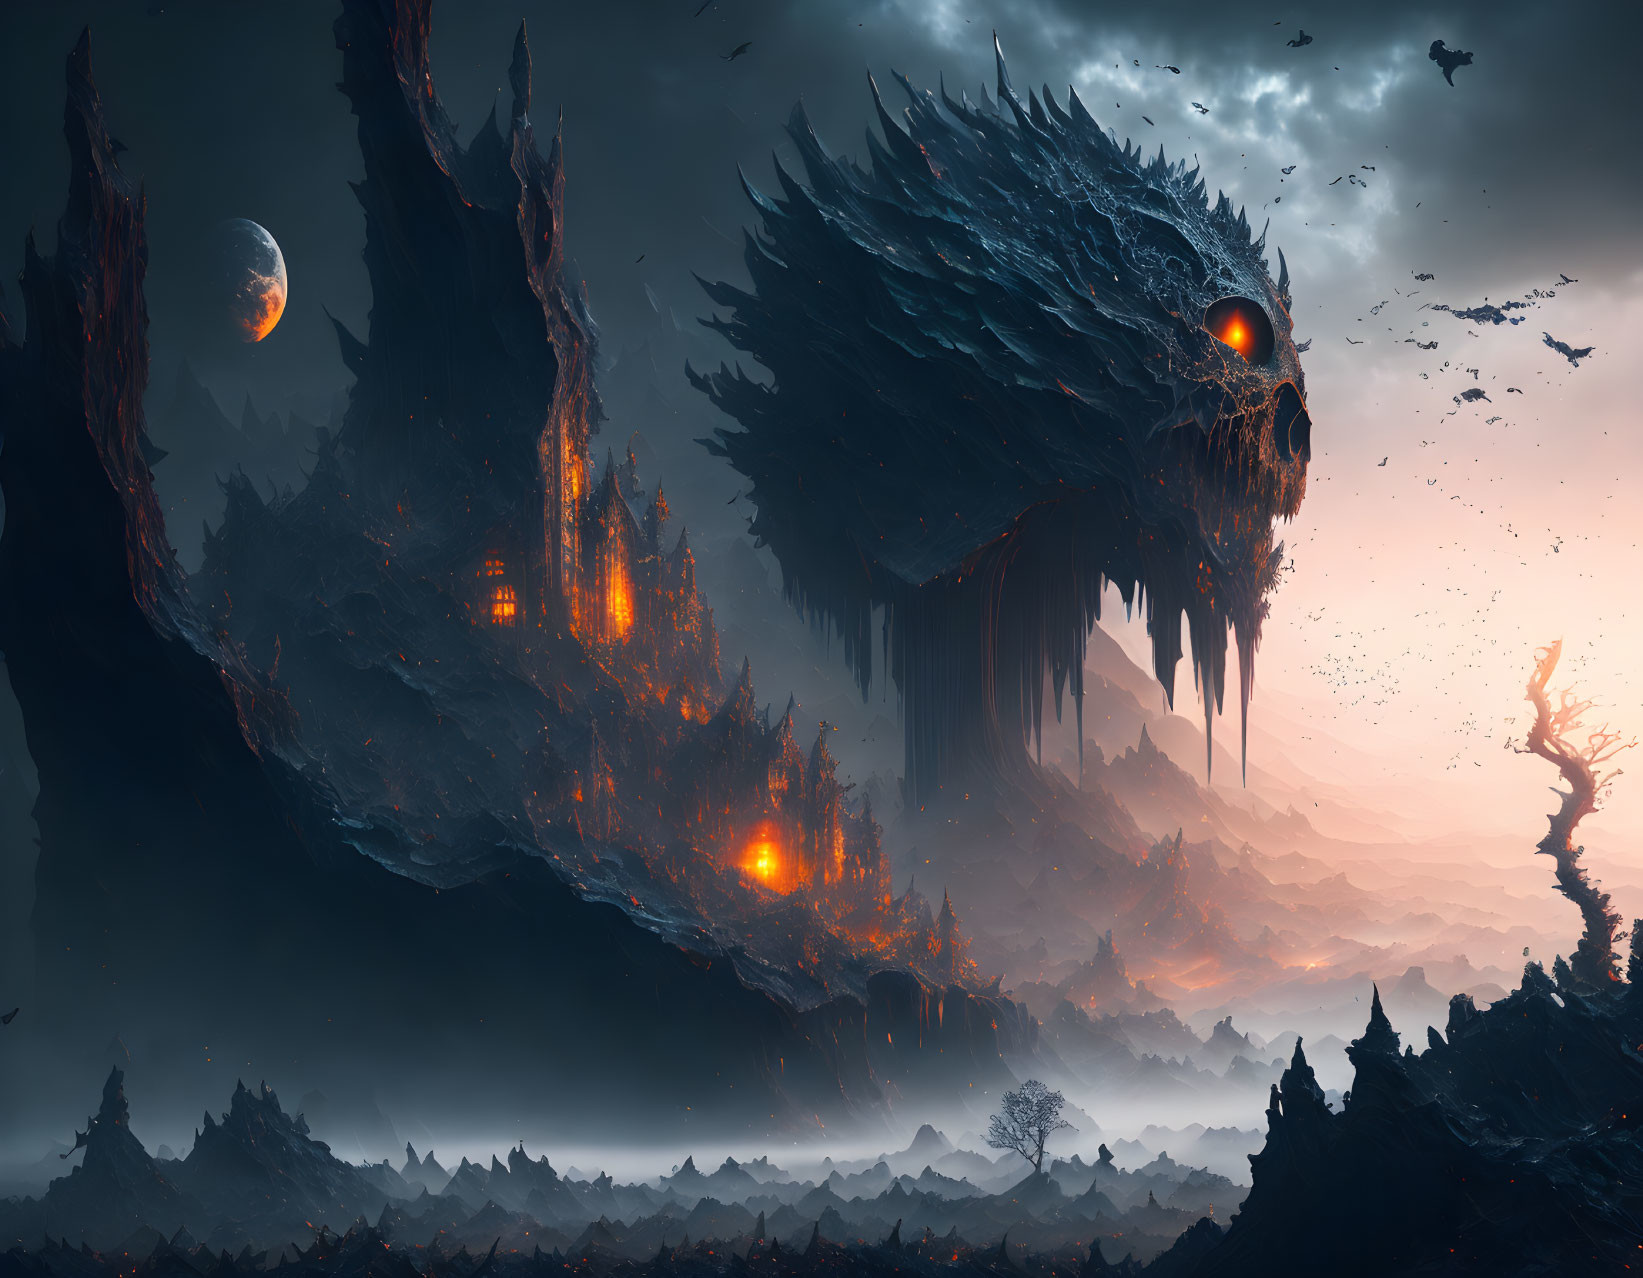 Dark Fantasy Landscape with Skull Mountain and Dual Moons